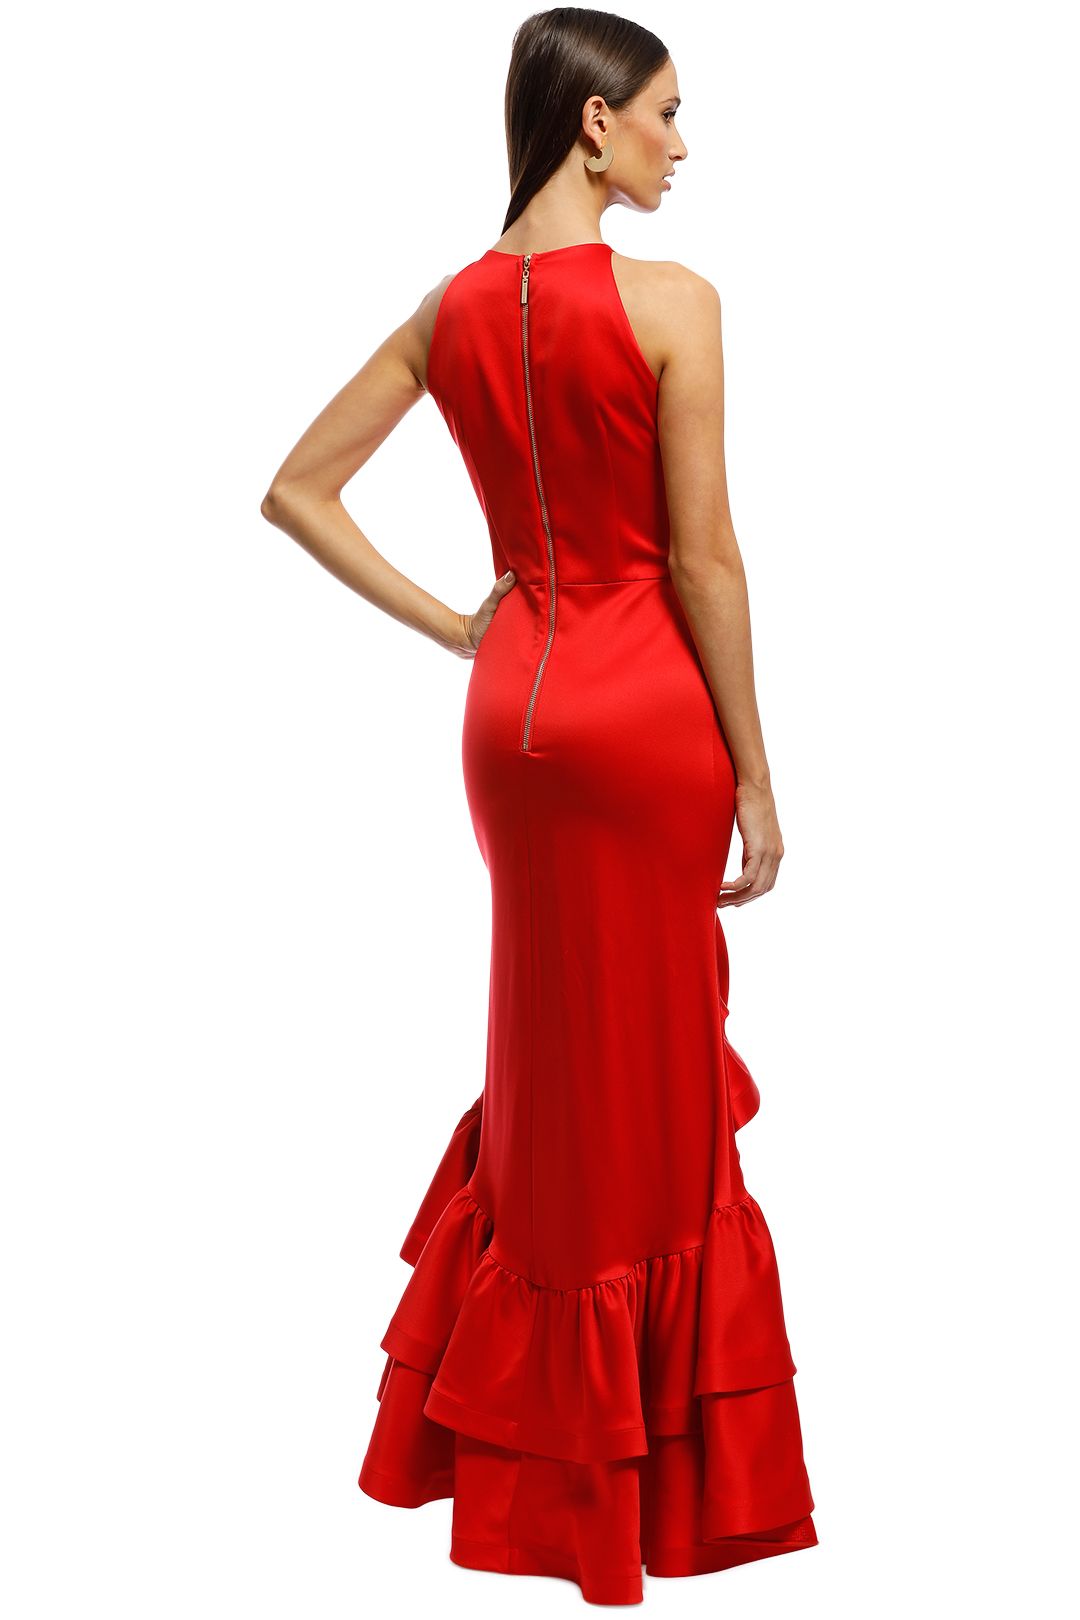 Frida flame dress - Red by Bronx and Banco for Hire